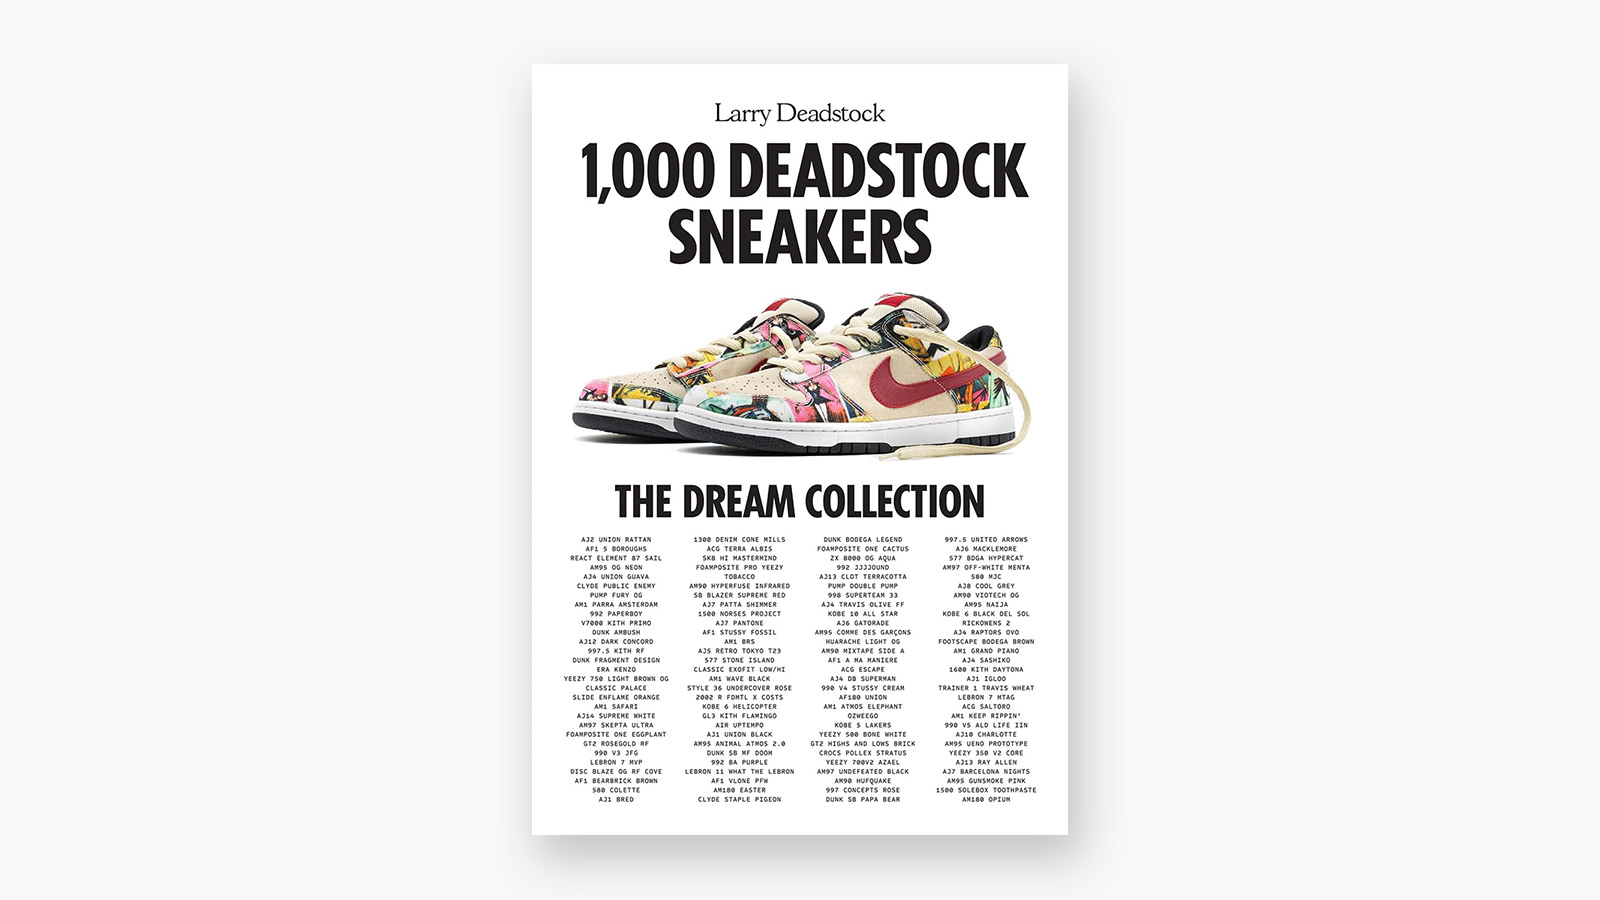 '1,000 Deadstock Sneakers: The Dream Collection' by Larry Deadstock